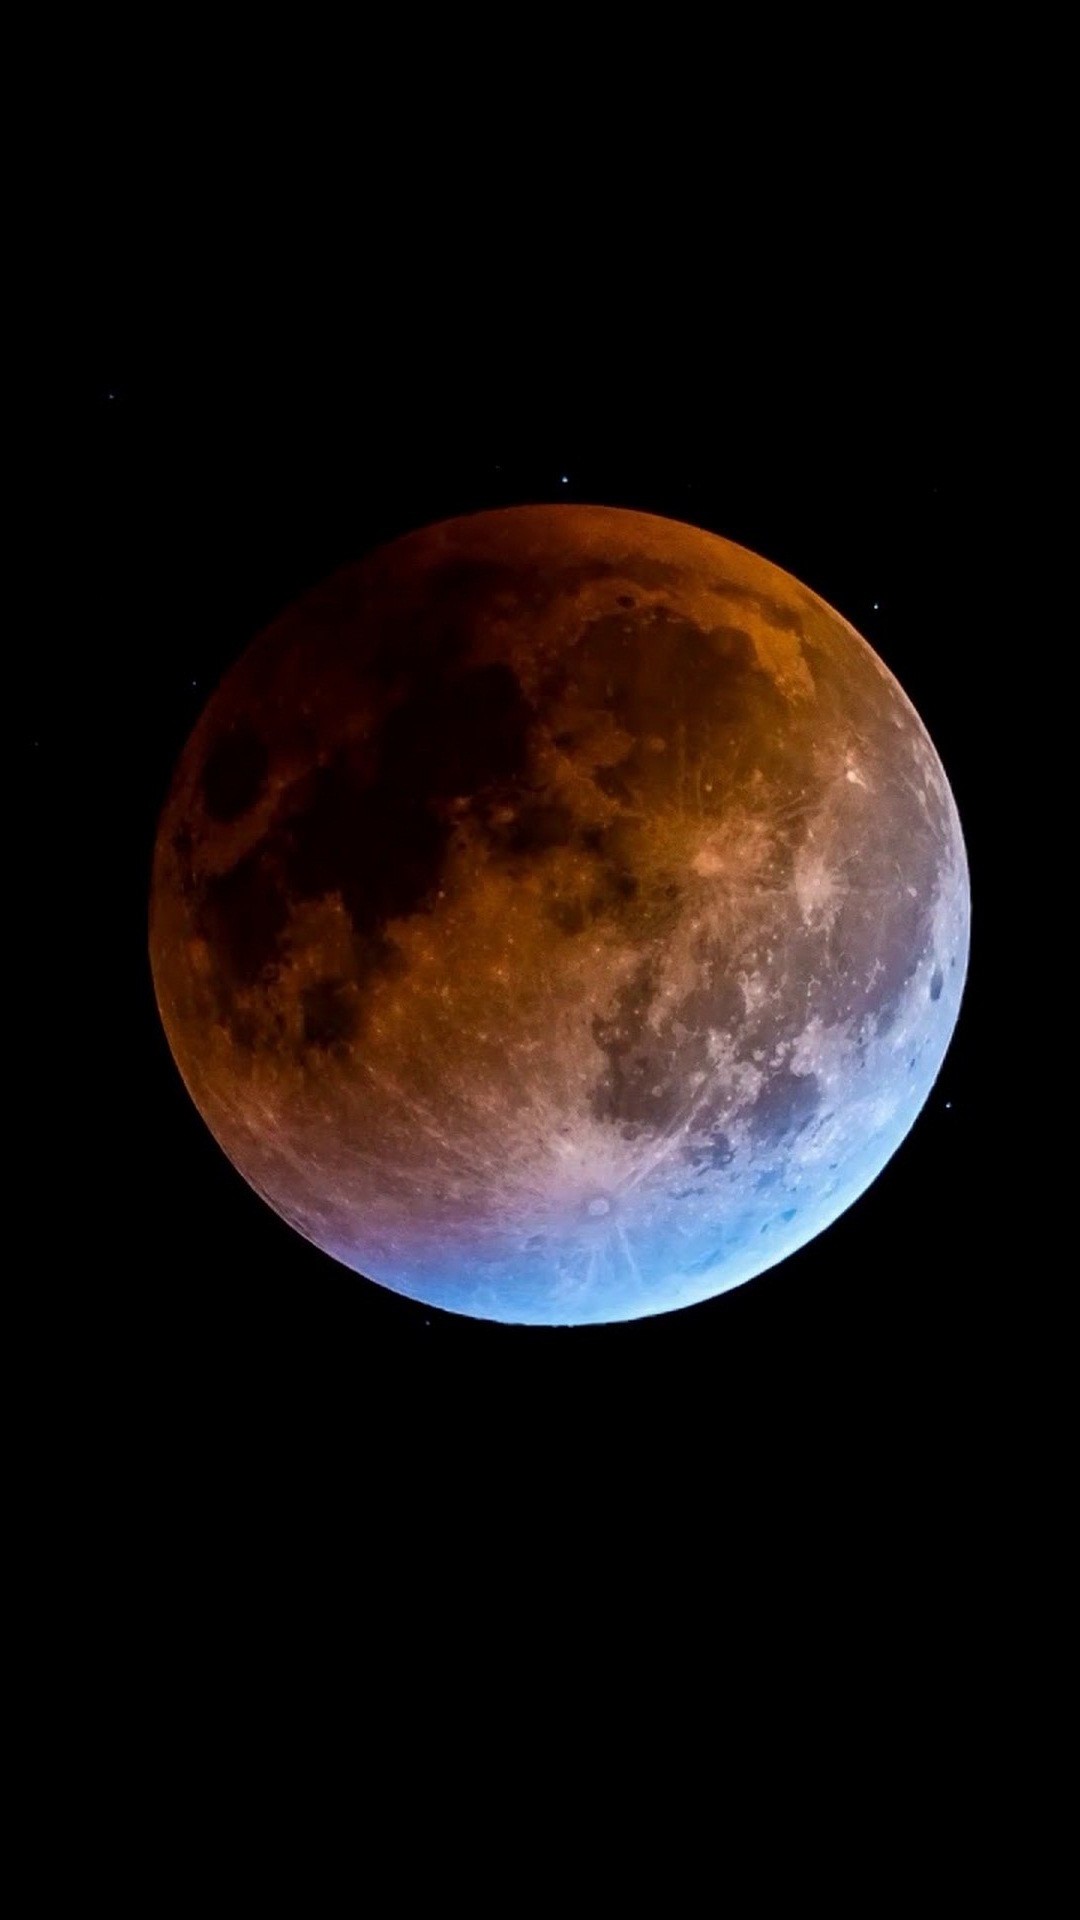 Super Blue Blood Moon Android Wallpaper with HD resolution 1080x1920